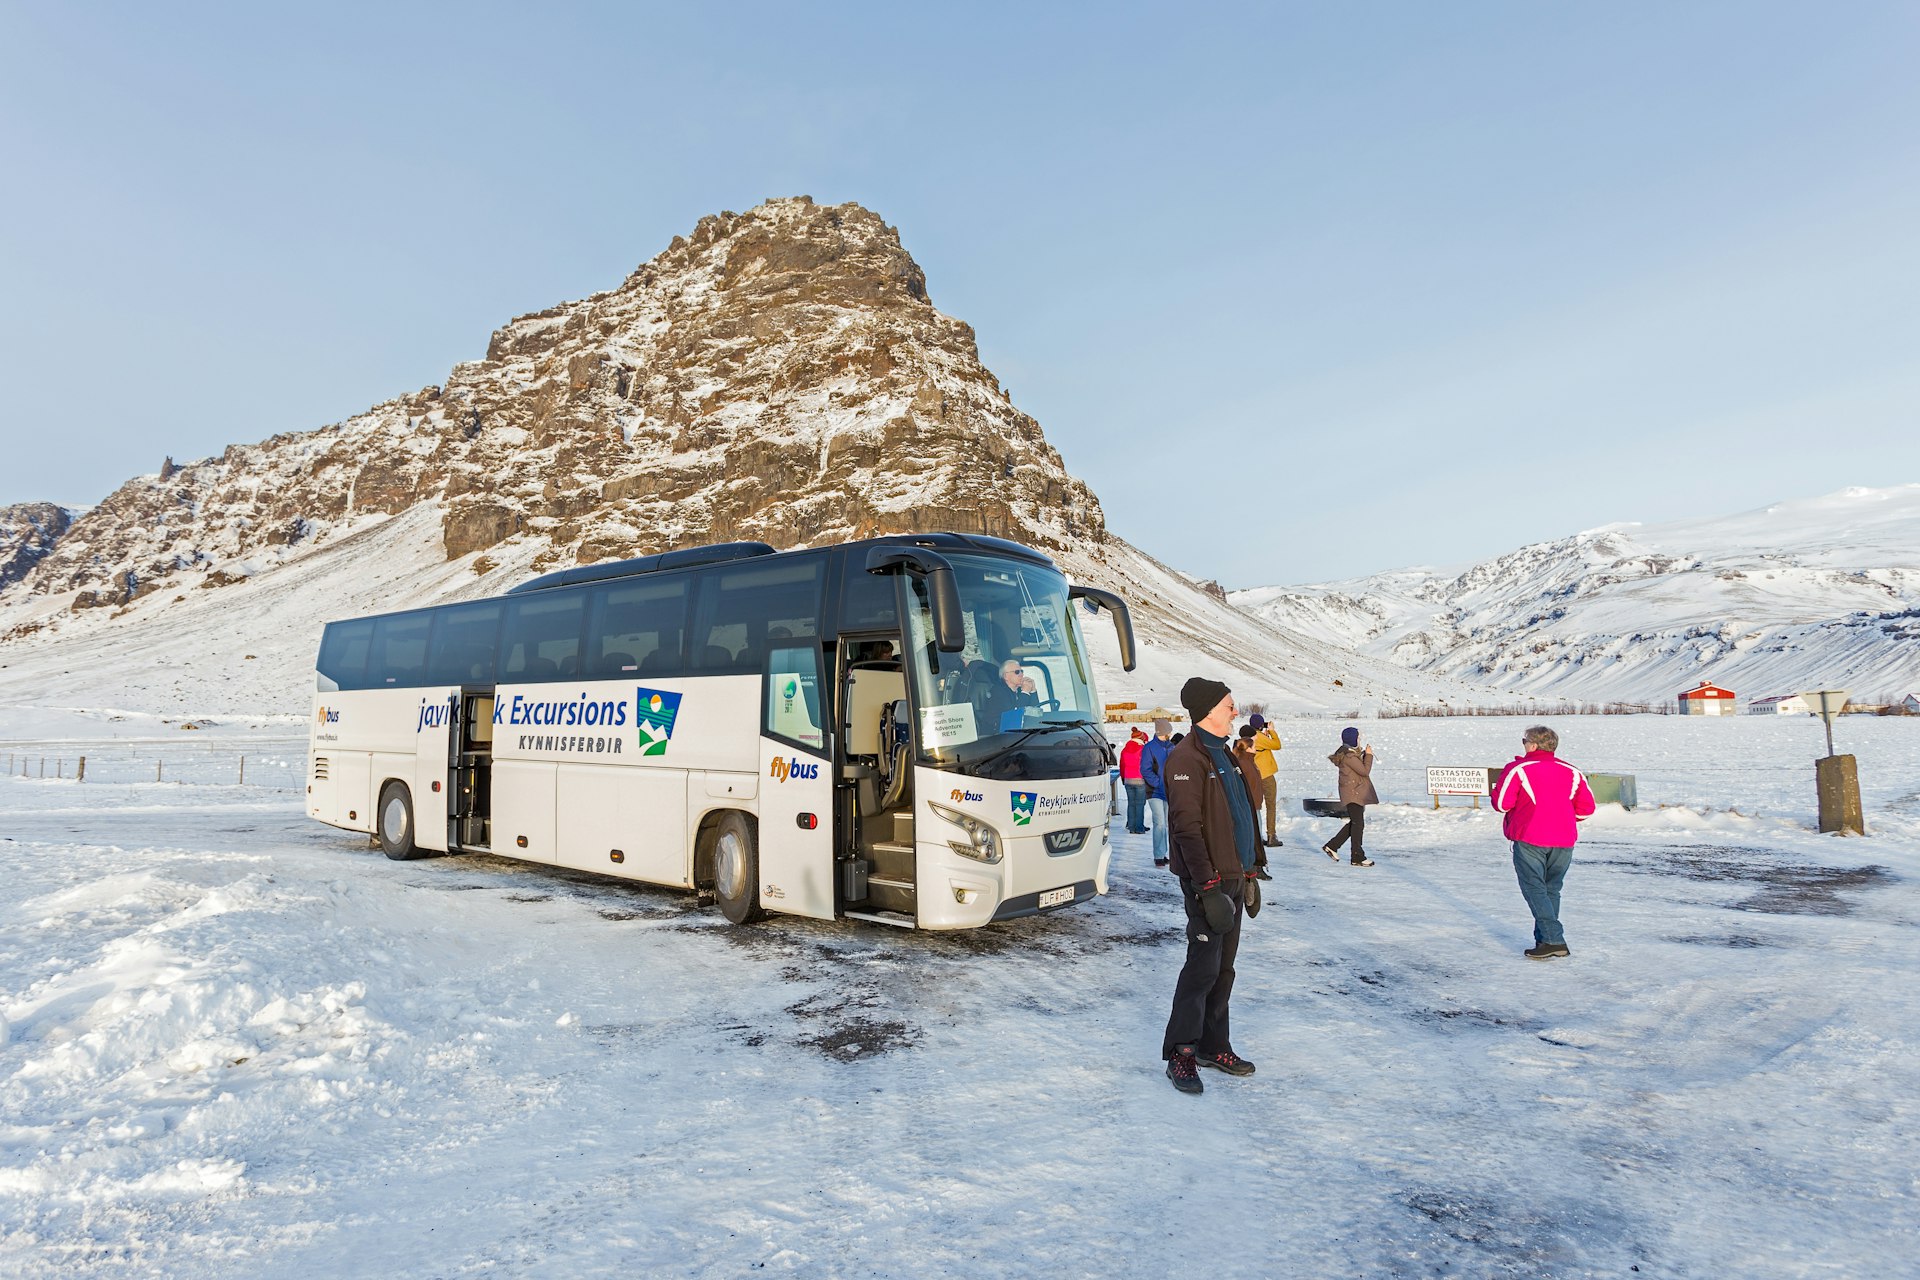 A tour bus parked in front of a snowy mountain